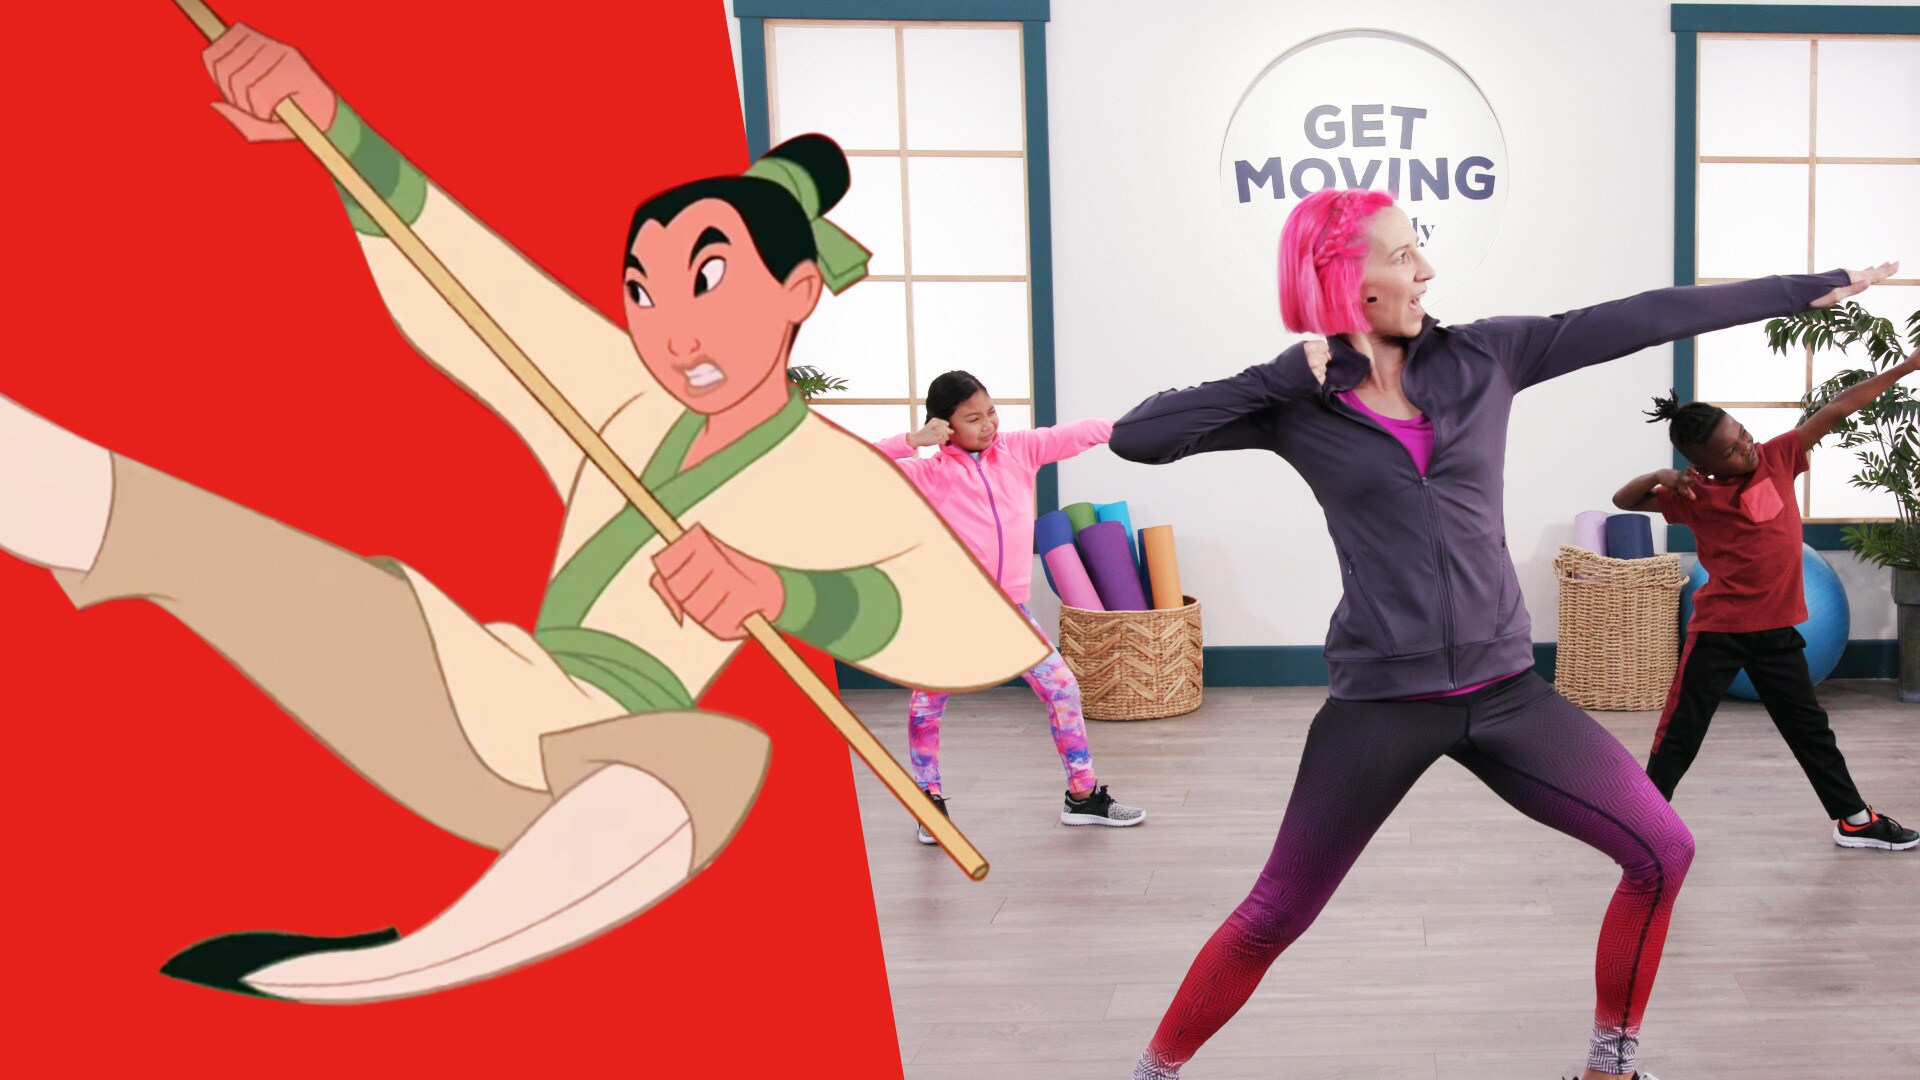 Mulan | Get Moving With Disney Family by Disney Family